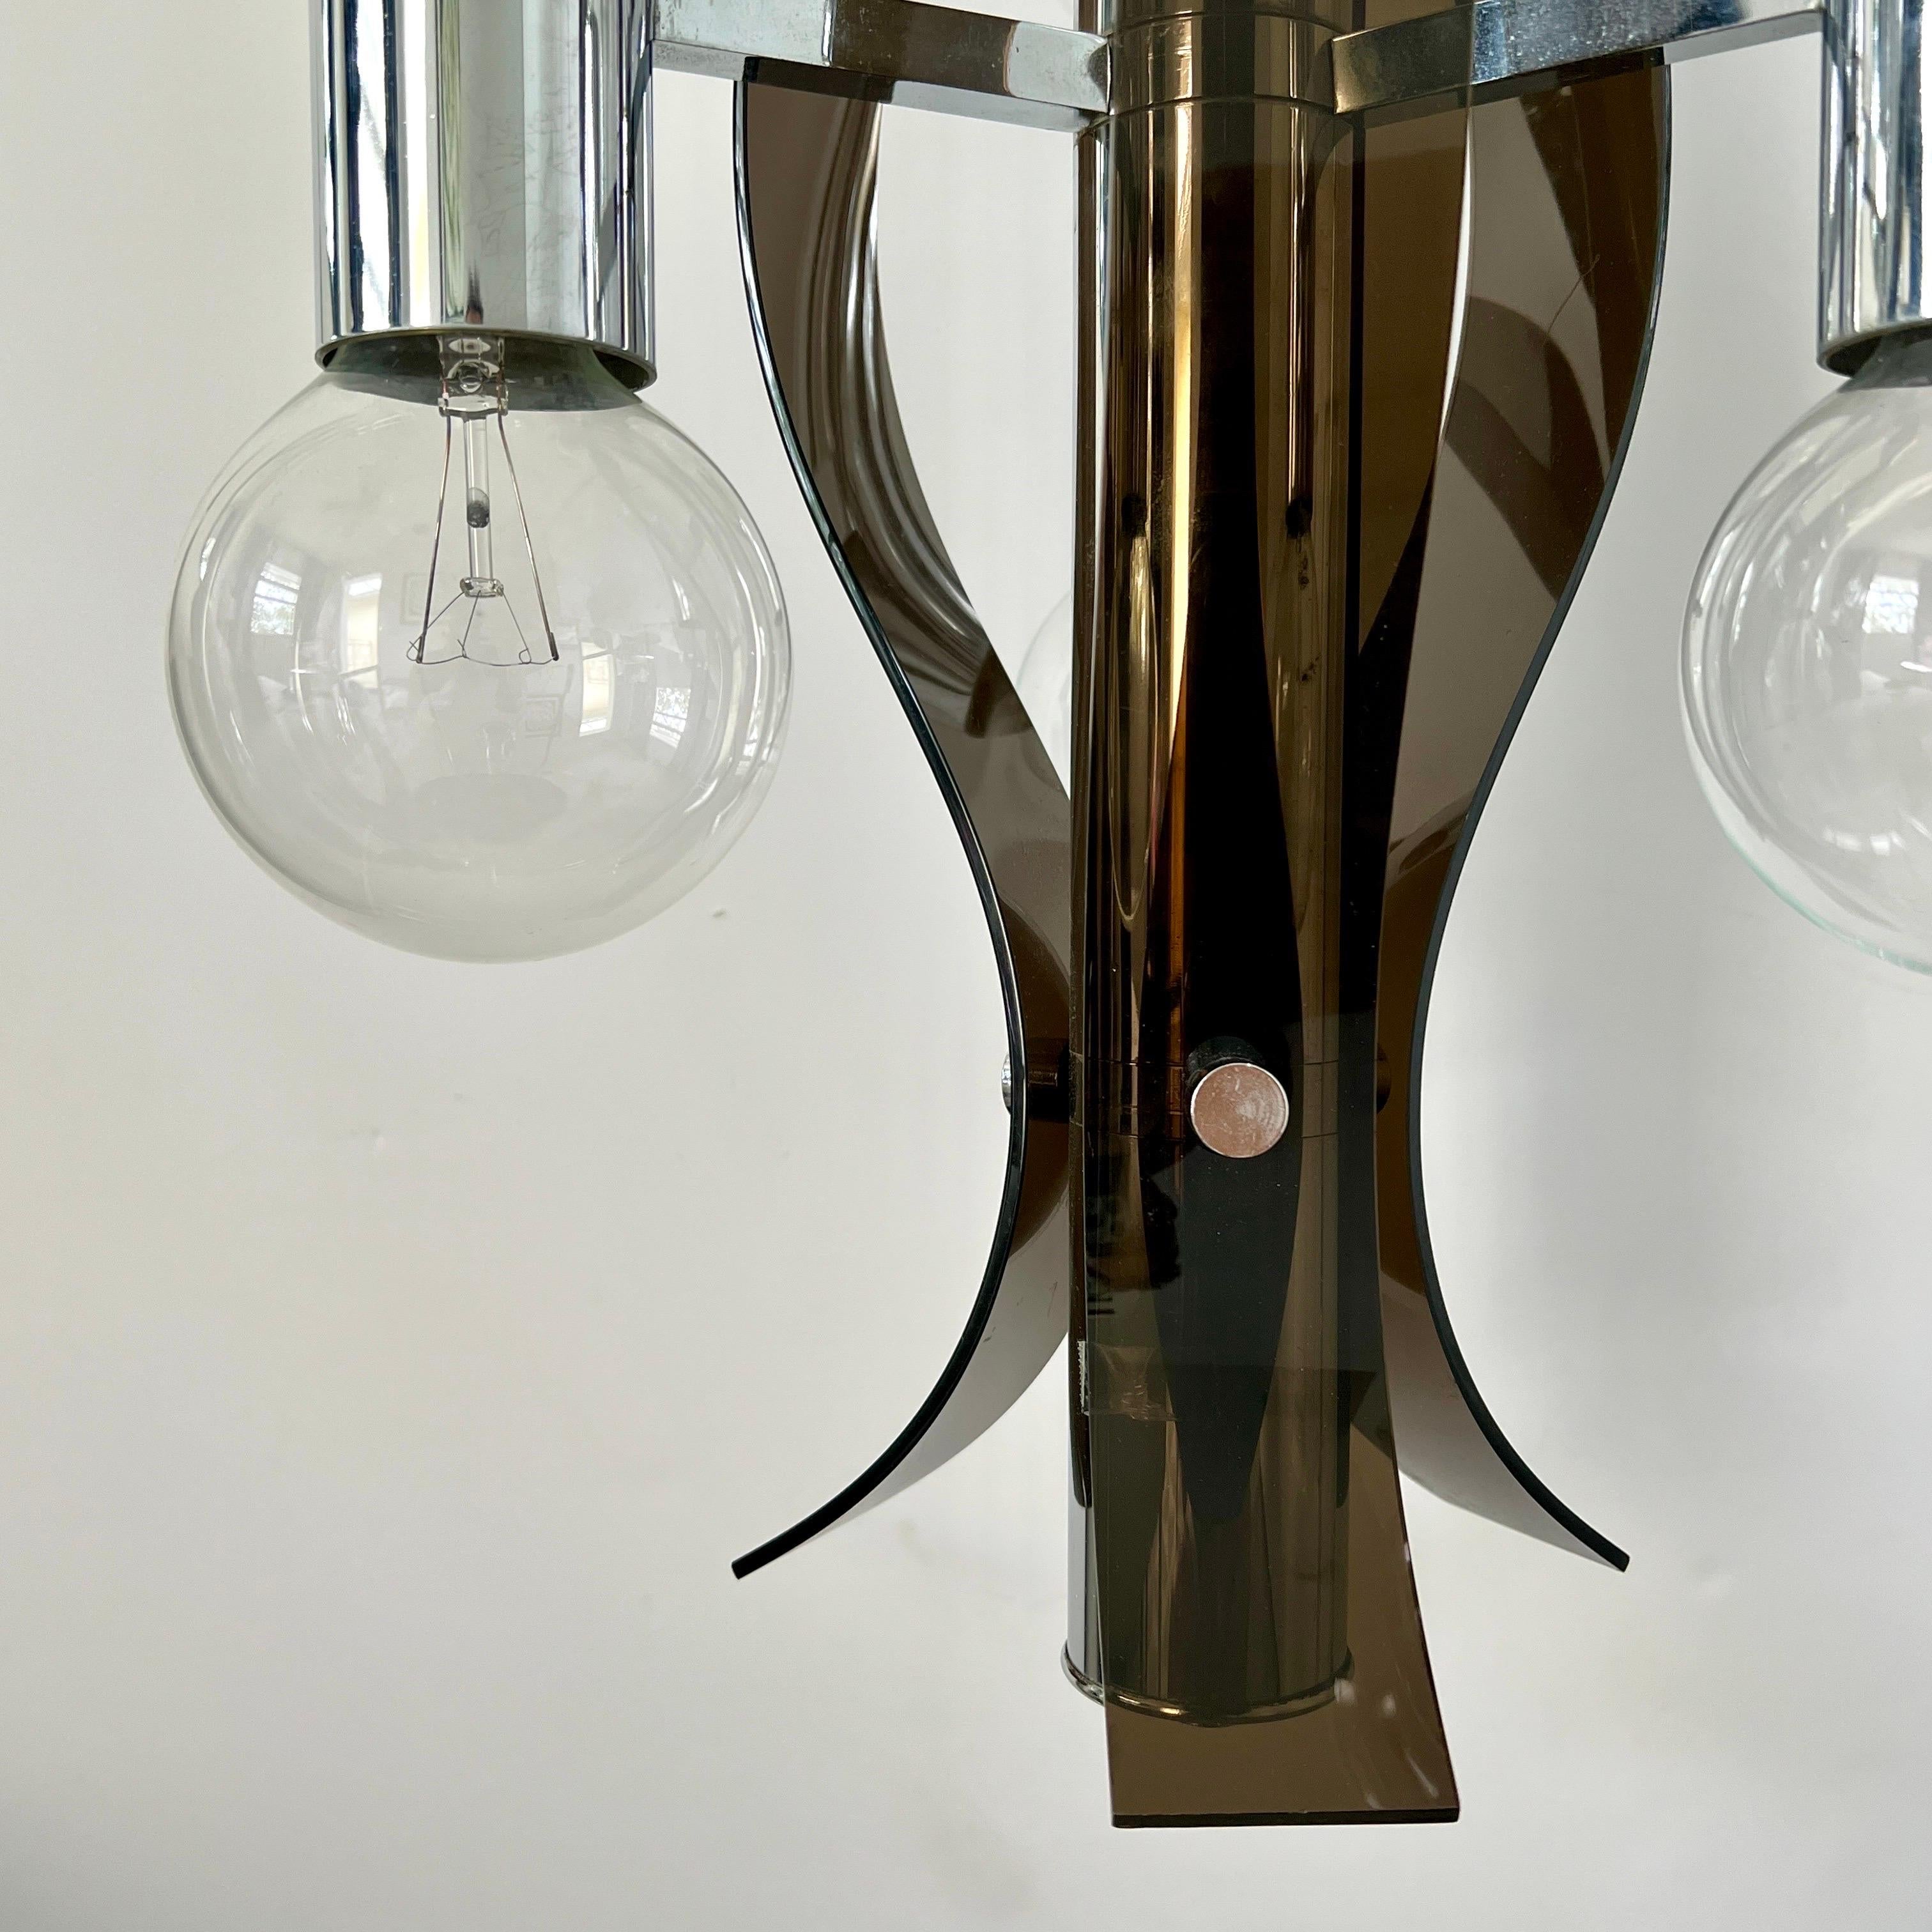 Sculptural Chandelier in Chrome and Smoked Lucite, Robert Sonneman, c. 1970's For Sale 1